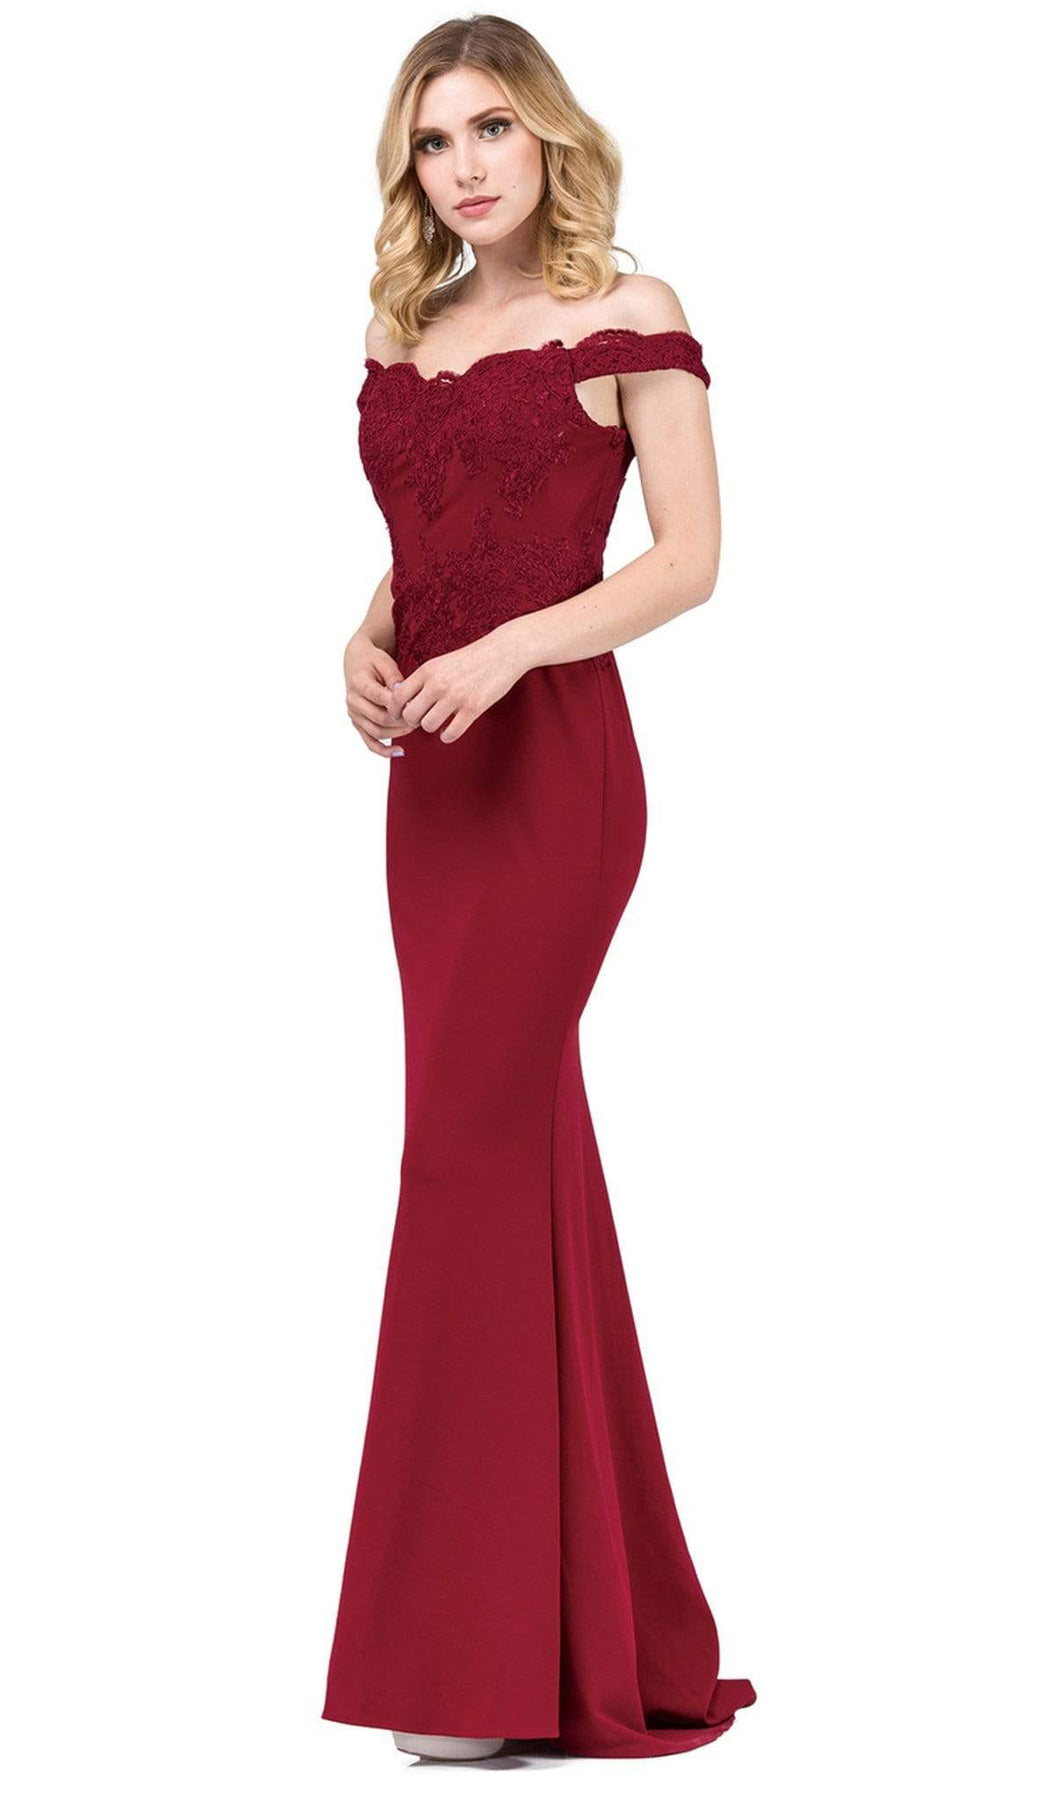 Dancing Queen - 2562 Lace Applique Off-Shoulder Fitted Prom Dress Prom Dresses